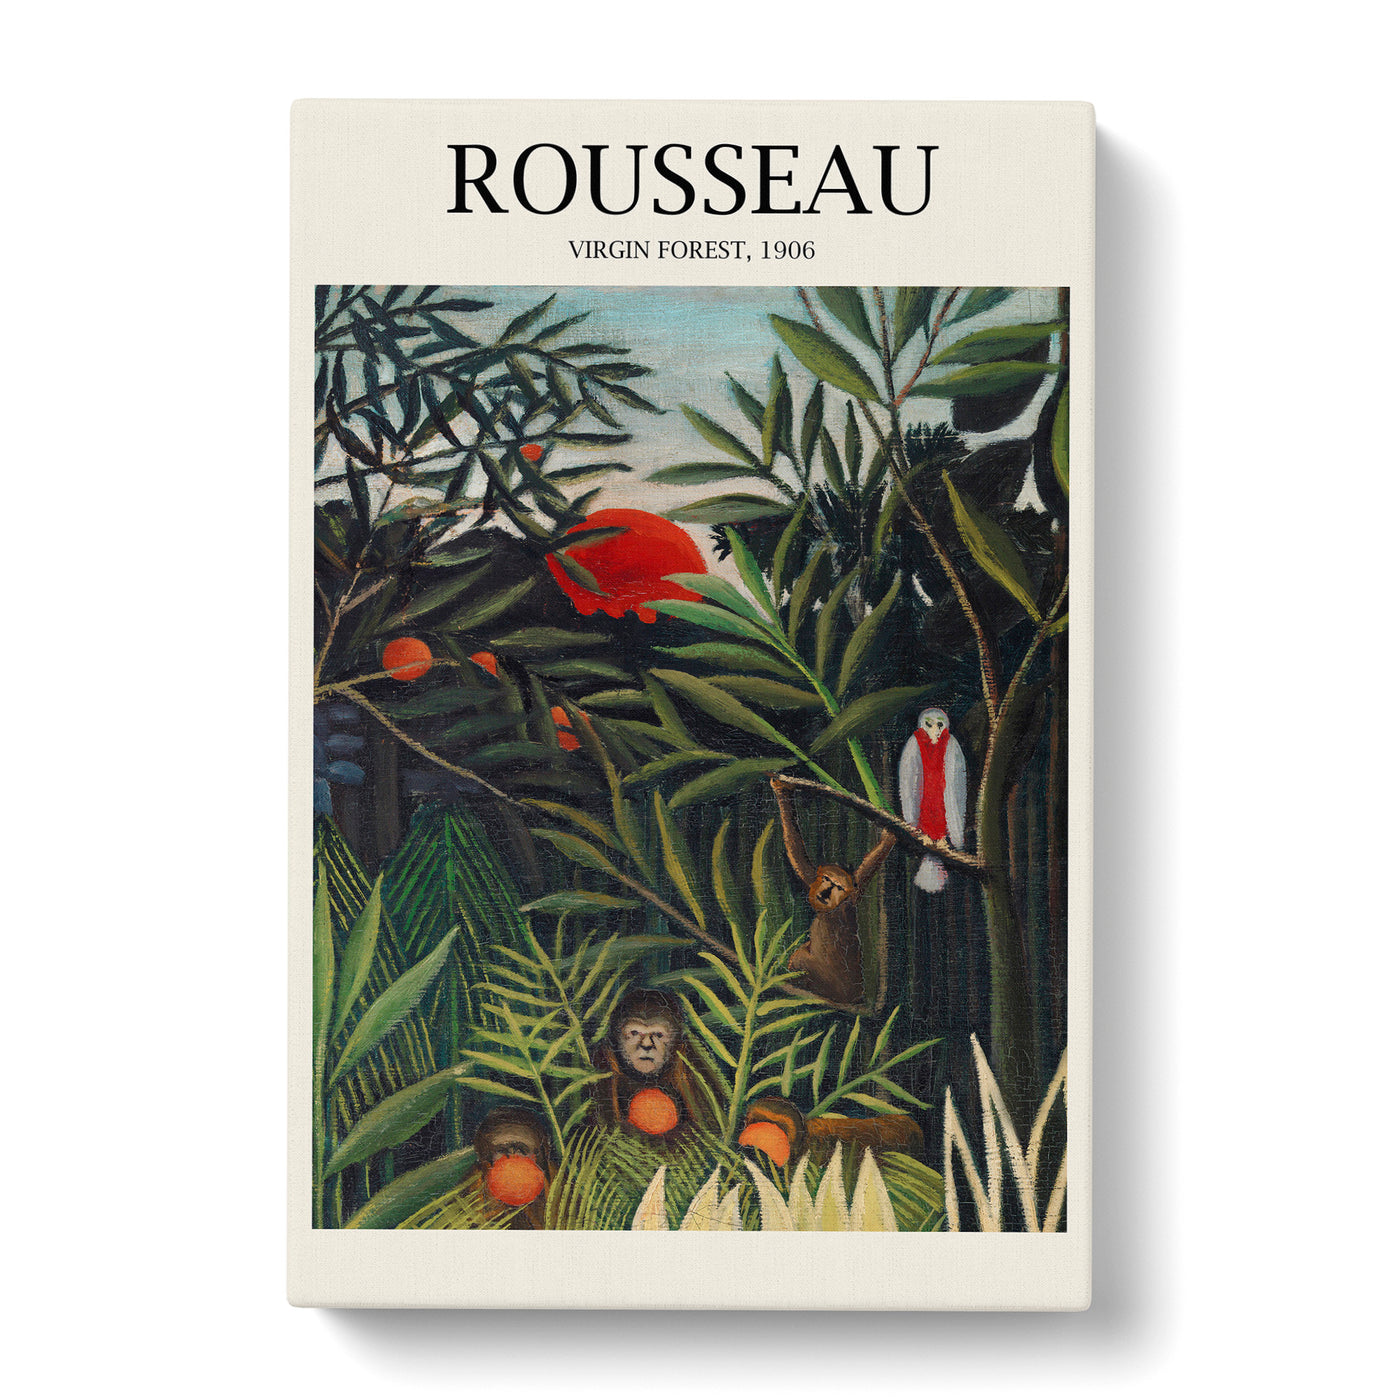 Monkeys And Parrot In The Virgin Forest Print By Henri Rousseau Canvas Print Main Image